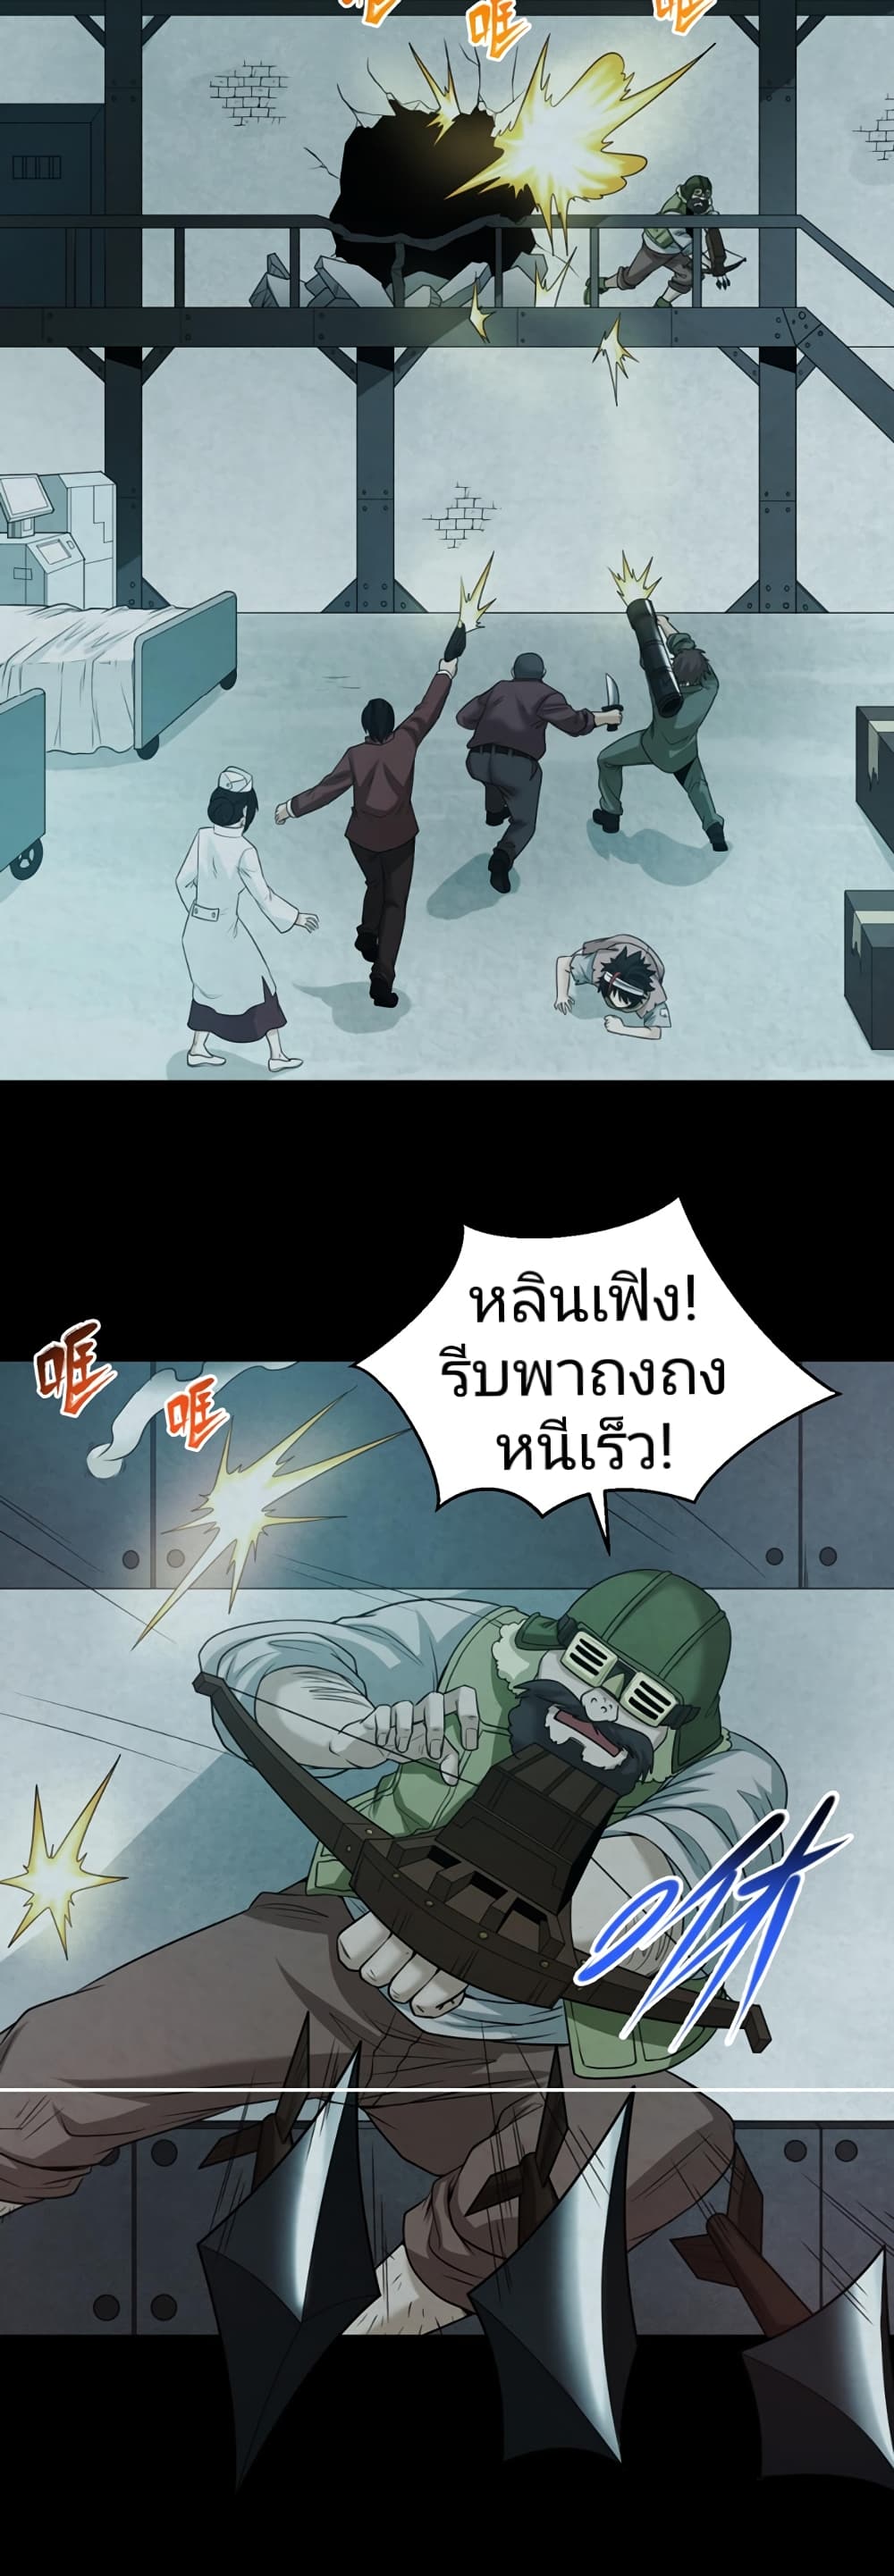 The Age of Ghost Spirits à¸à¸­à¸à¸à¸µà¹ 33 (6)